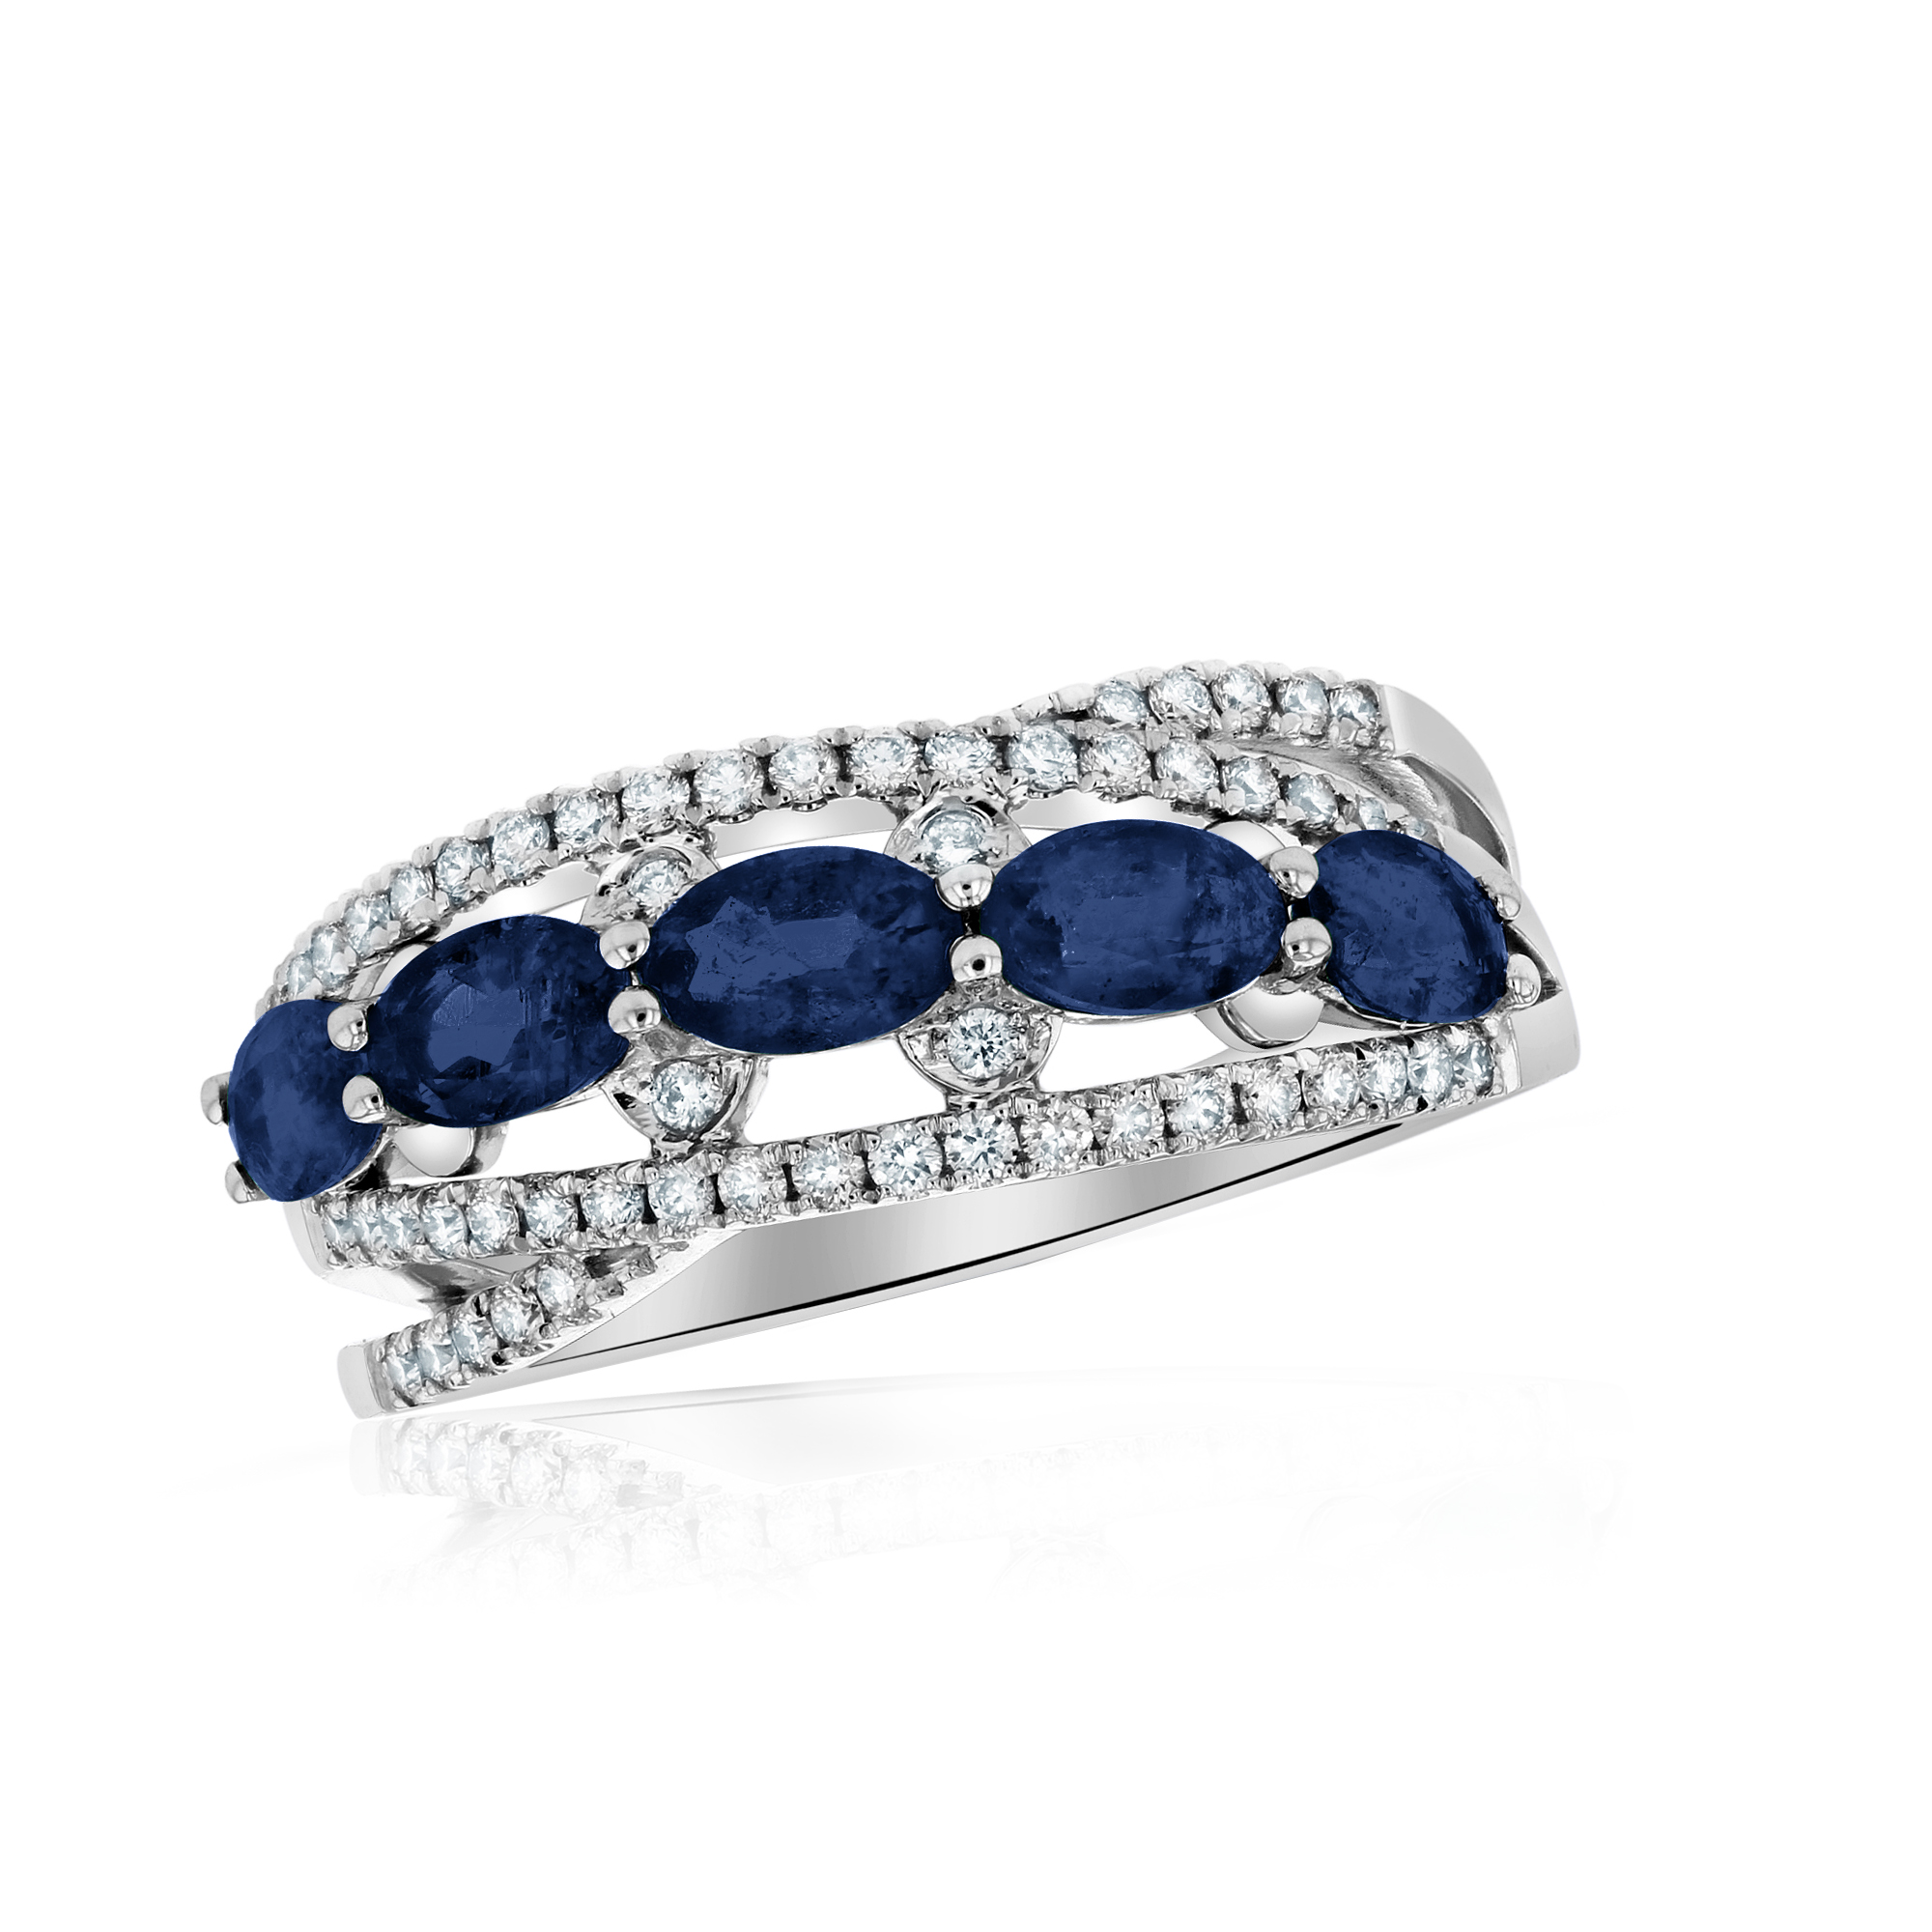 View 0.31ctw Diamond and Sapphire Ring in 14k White Gold